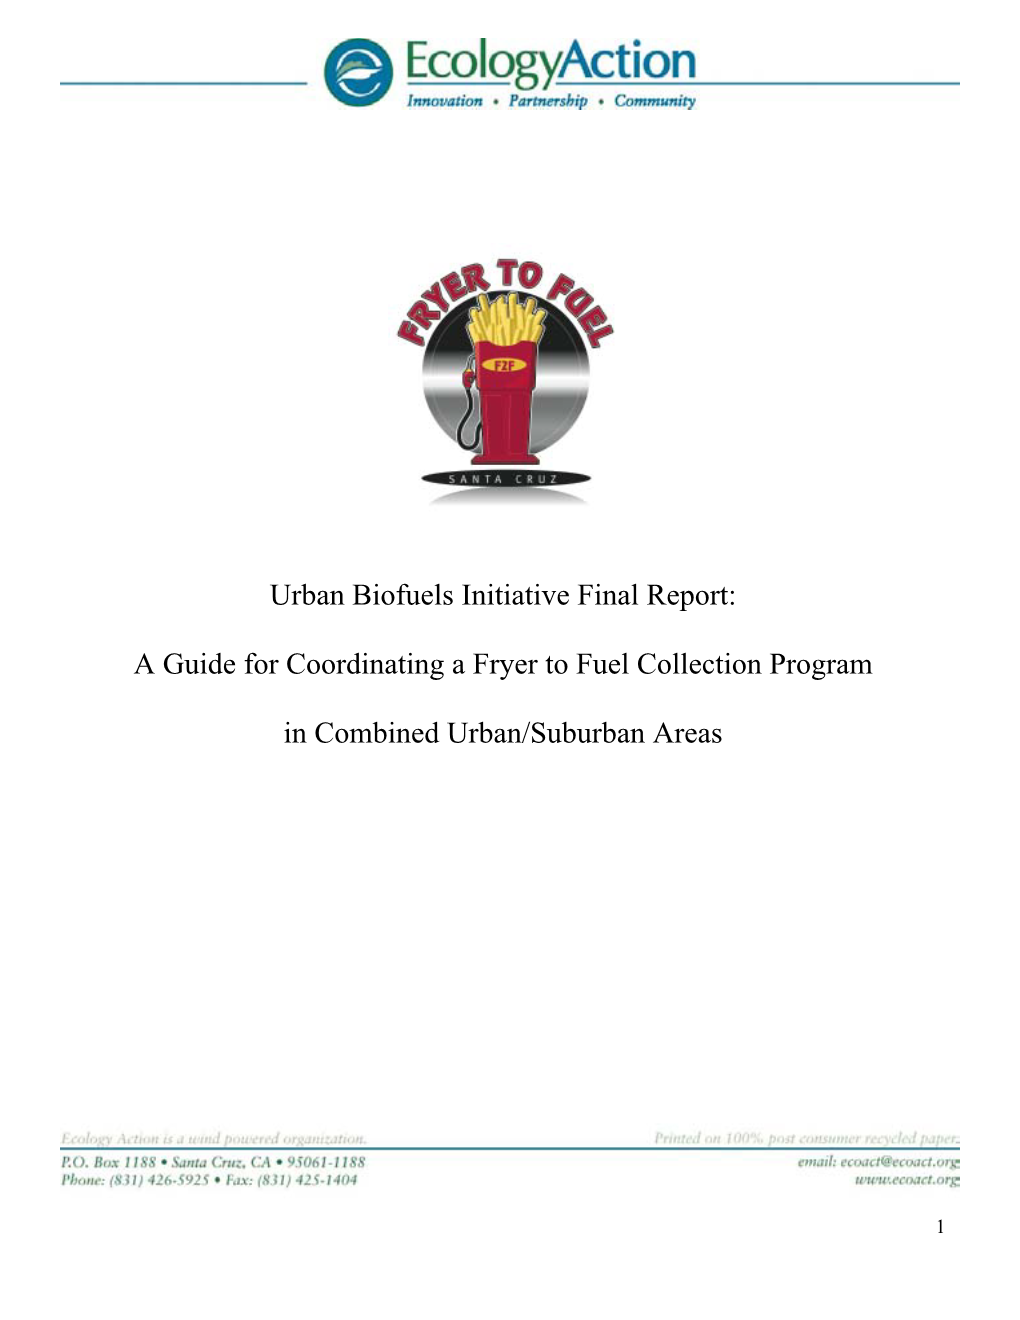 A Guide for Coordinating a Fryer to Fuel Collection Program In